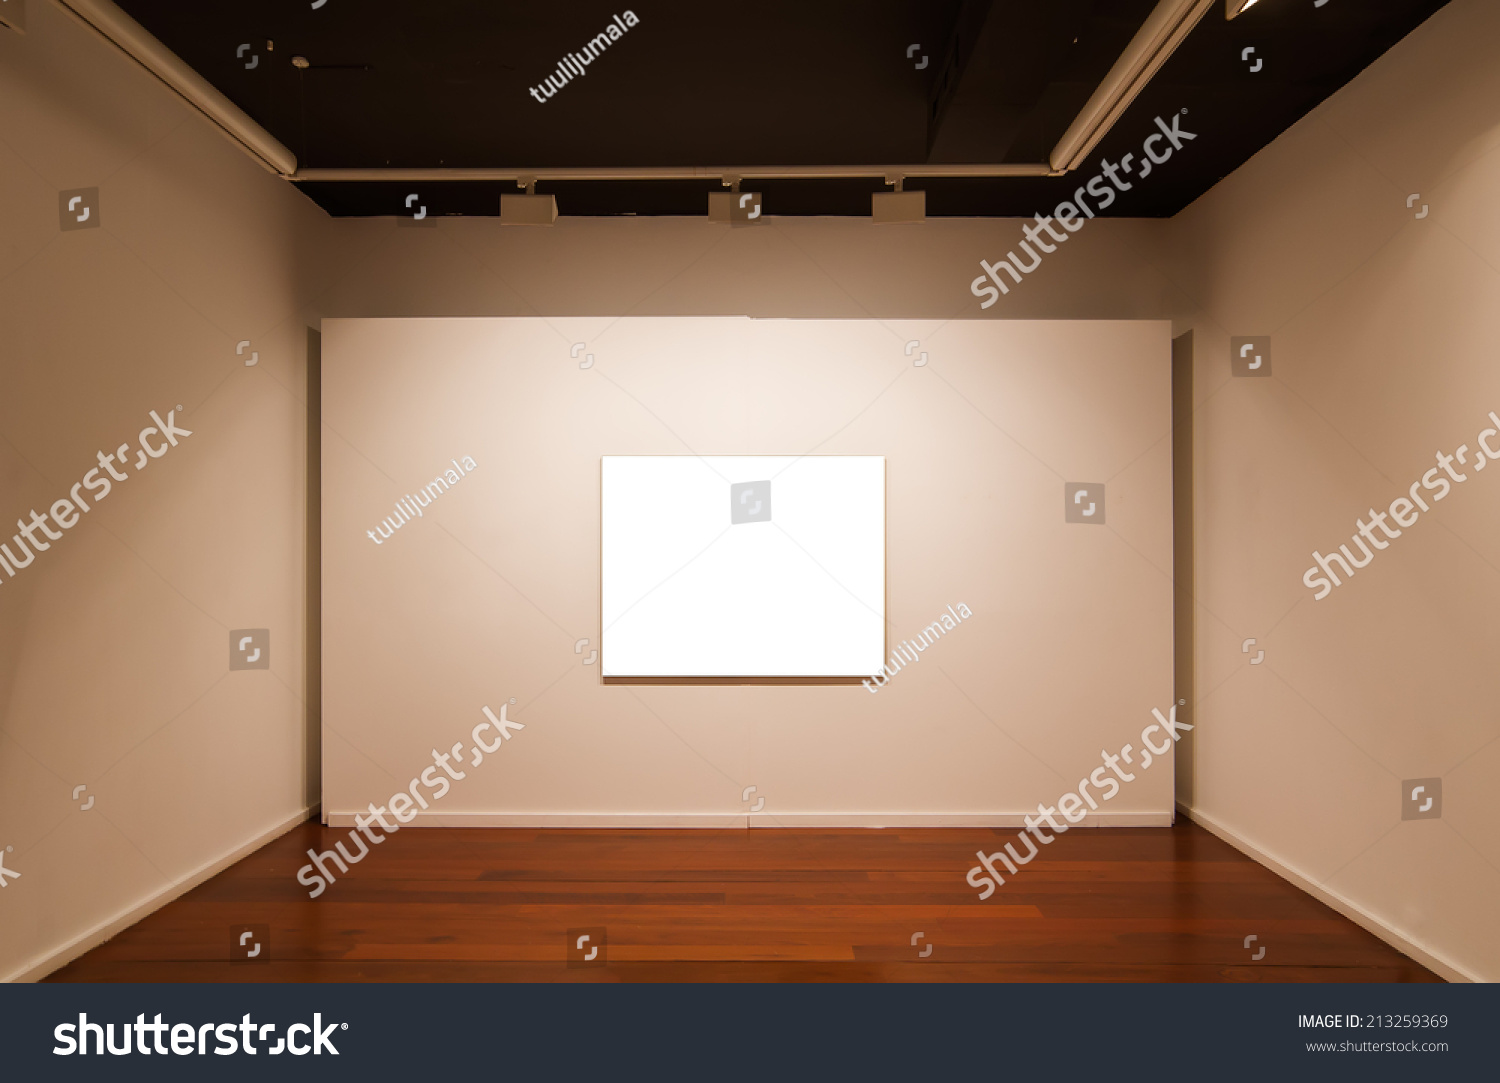 powerpoint-template-3d-museum-art-gallery-interior-with-blank